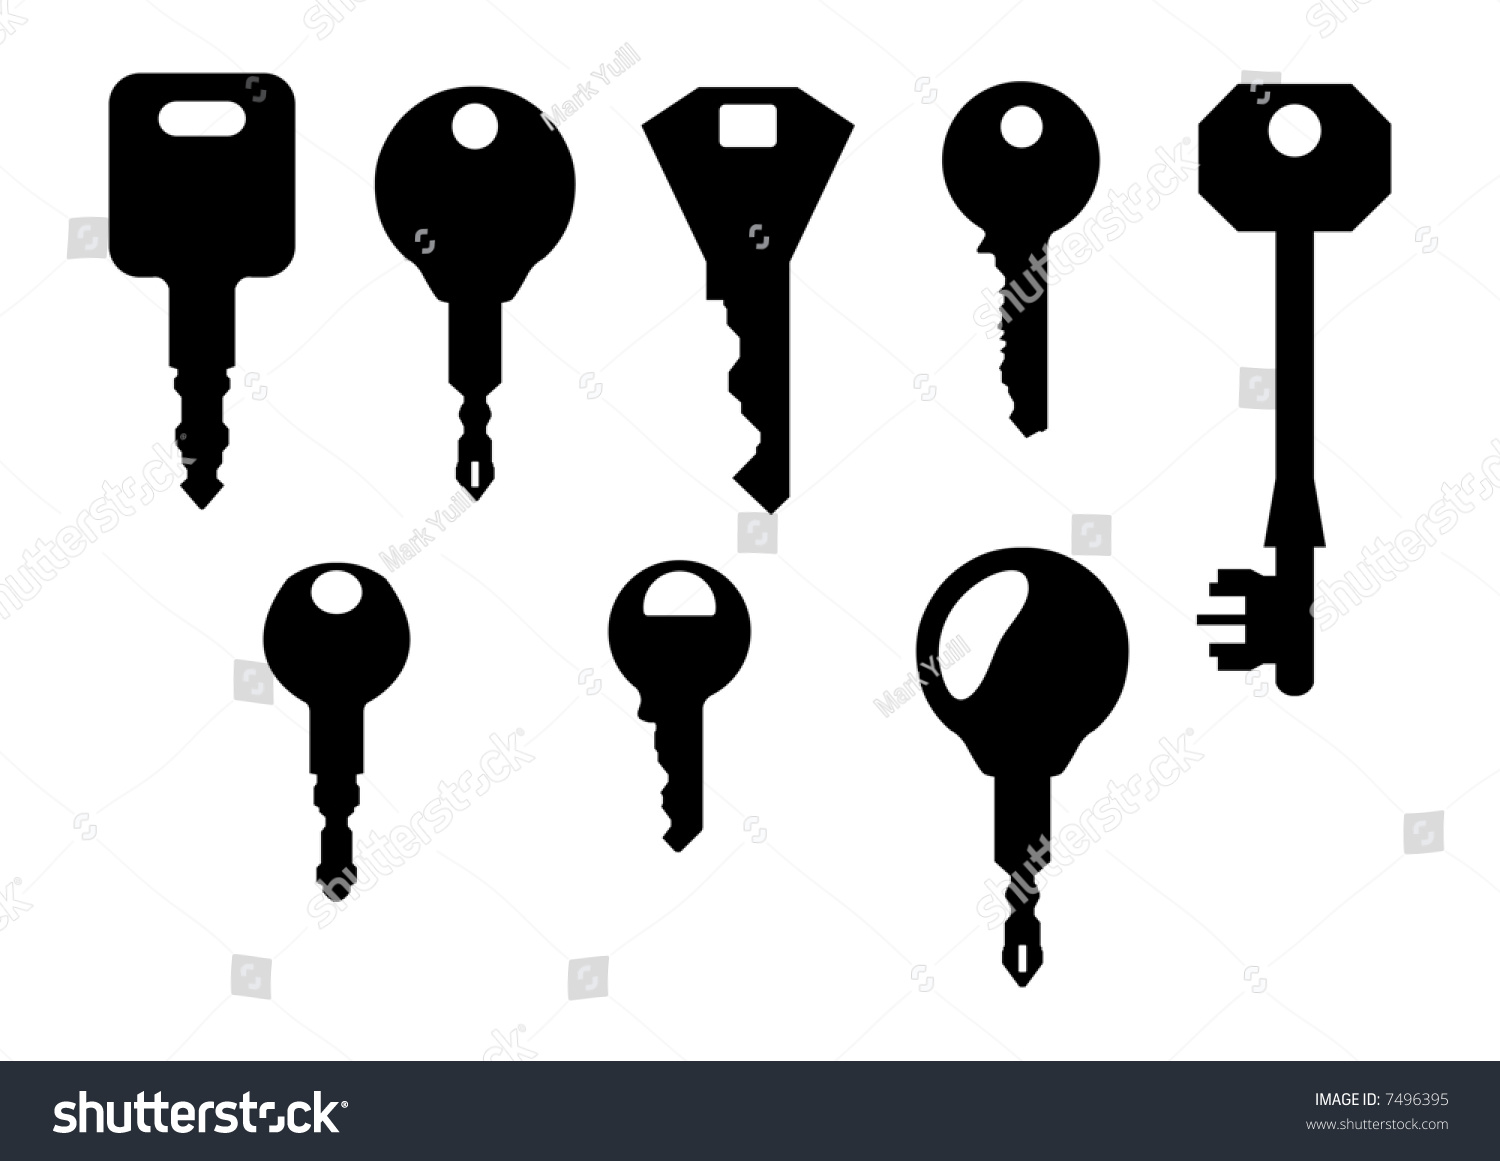 Download Isolated Key Shapes On White Background Stock Vector ...